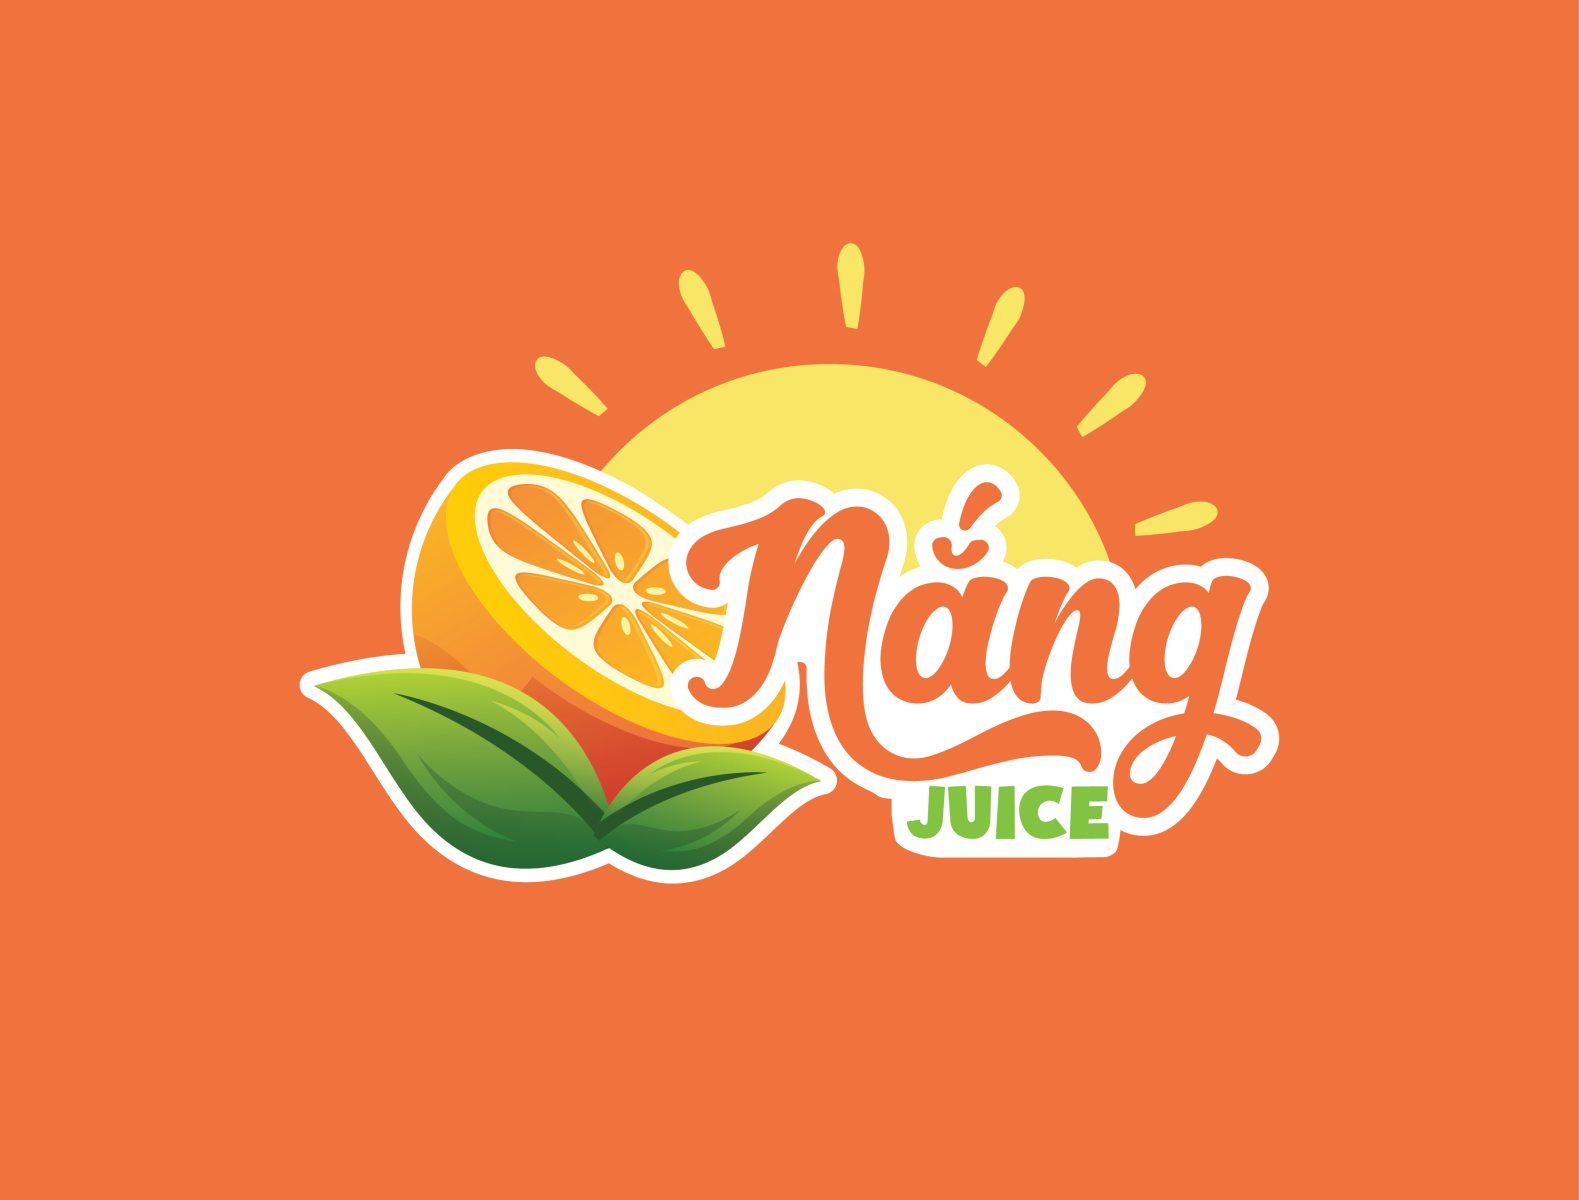 Nắng Juice - Sunshine Juice logo by Brandall Agency by Brandall Design